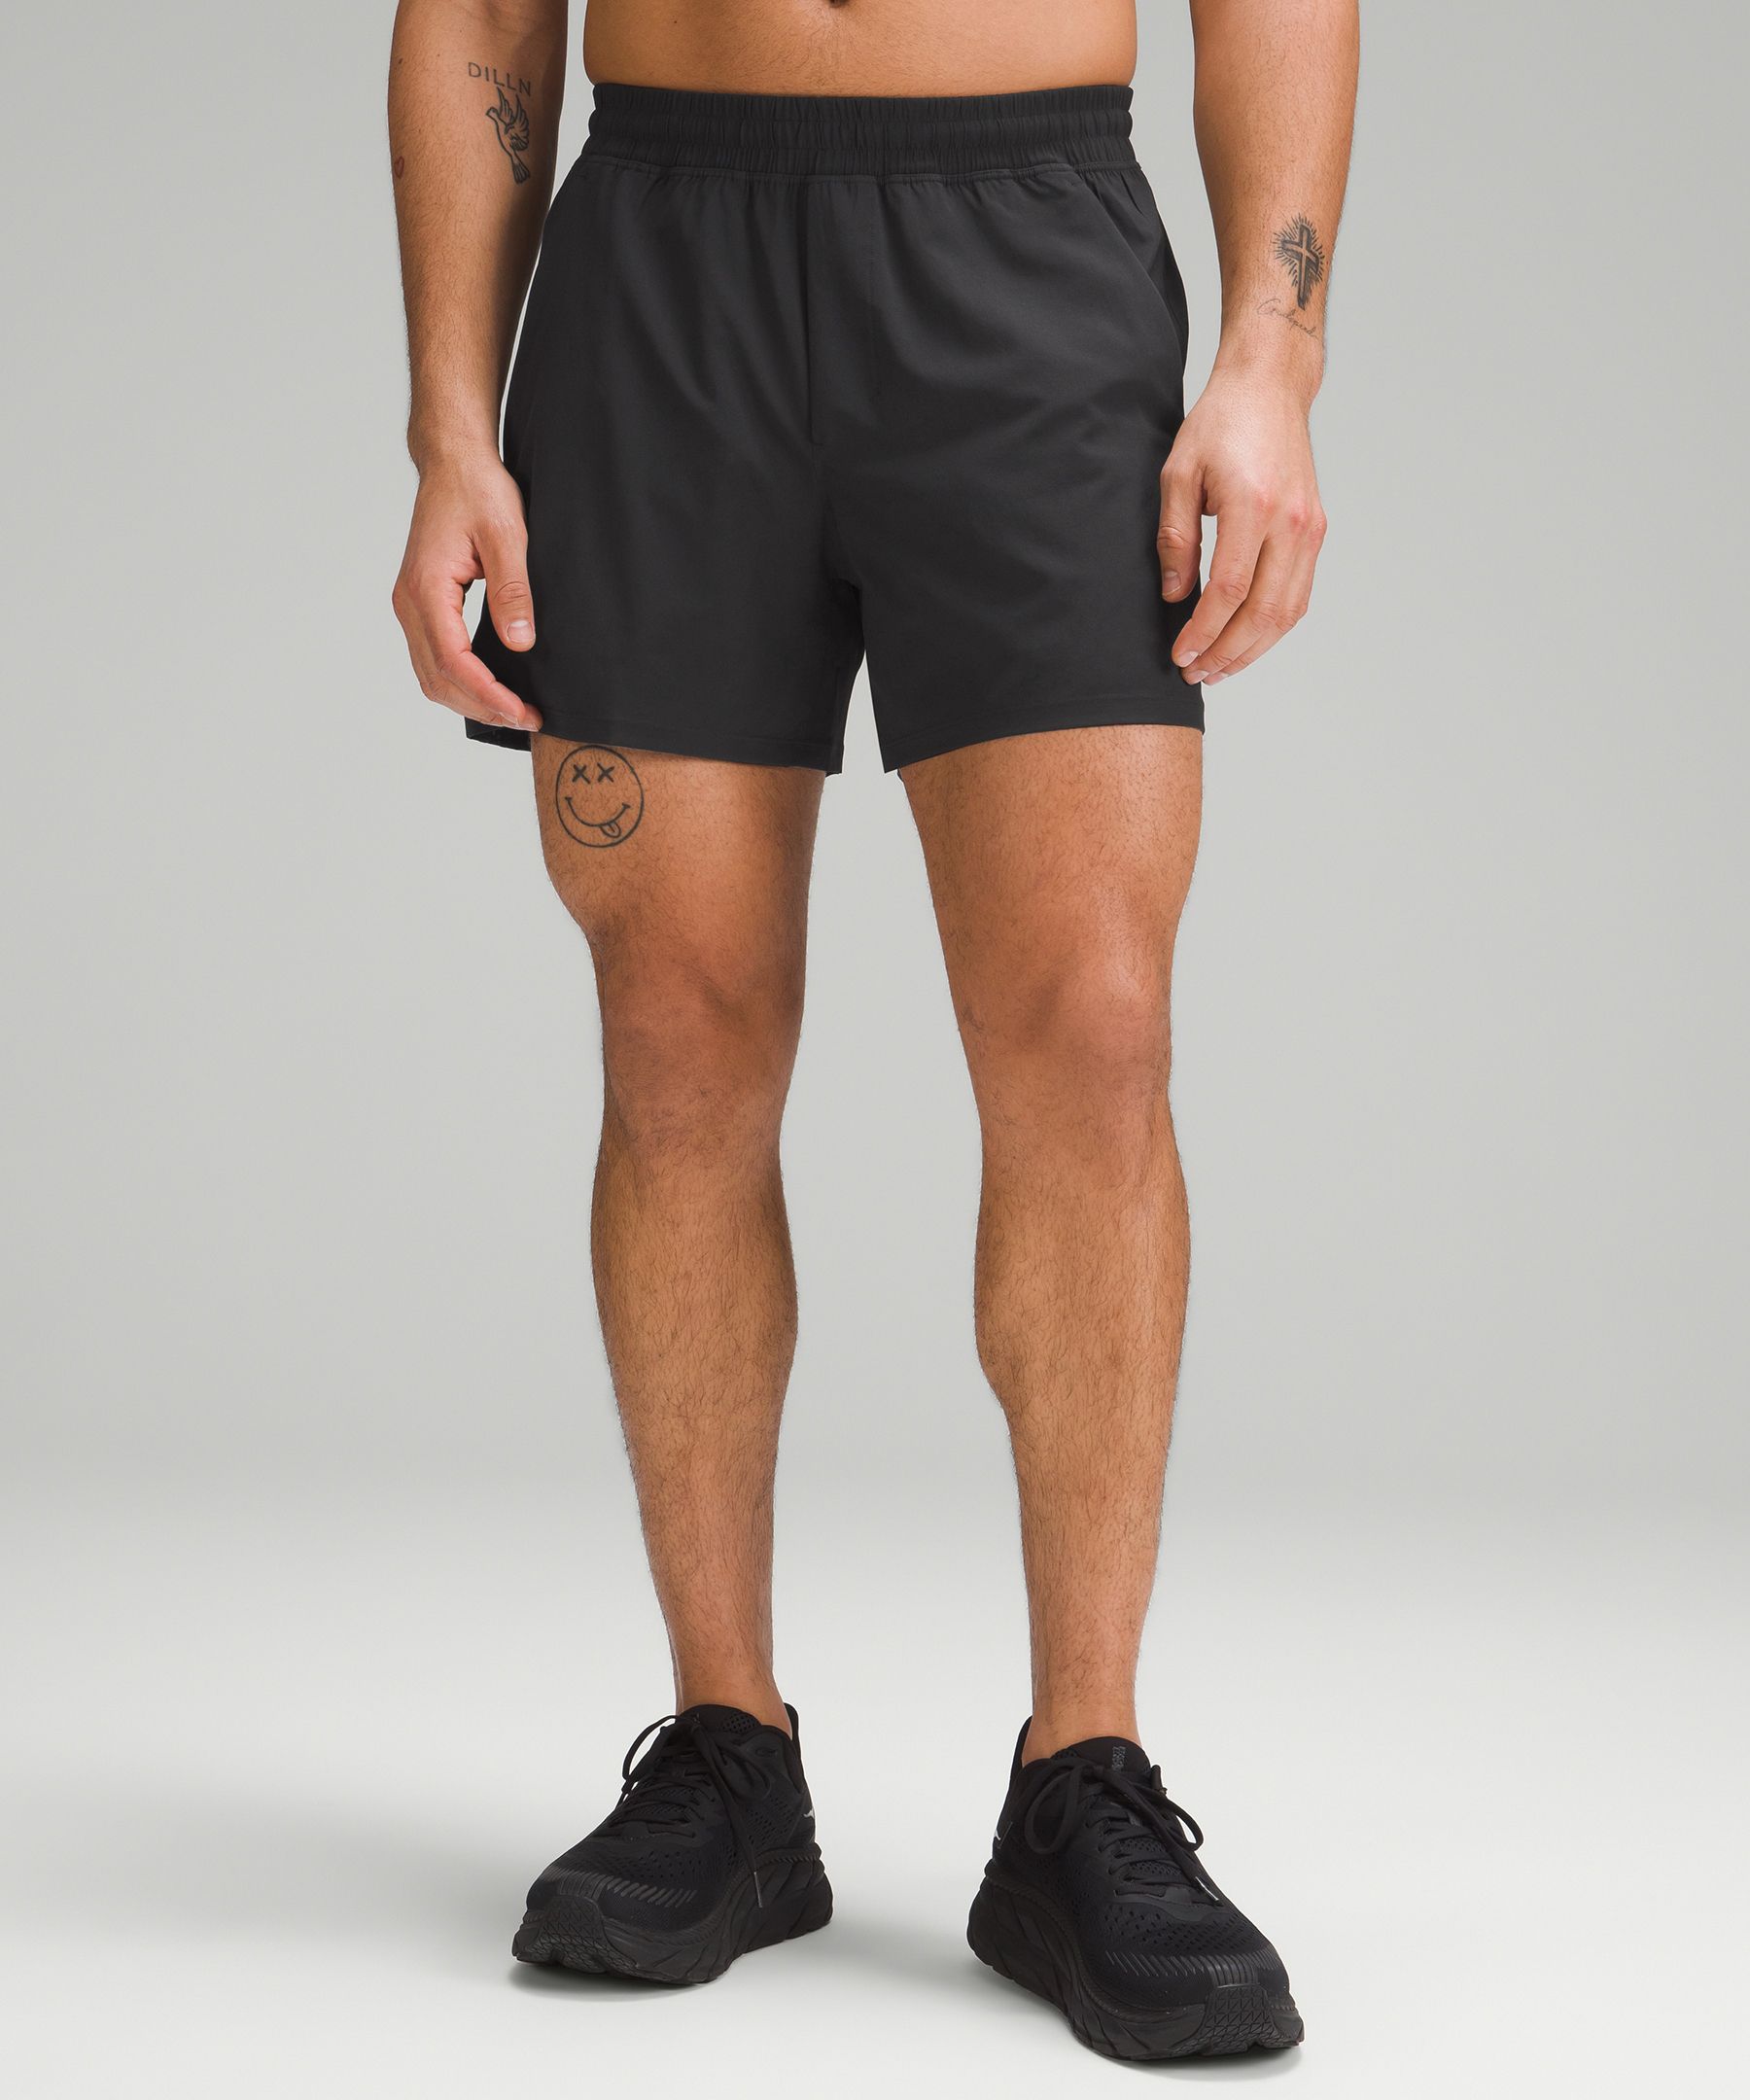 These Are the Best lululemon Men's Shorts and They're All on Sale